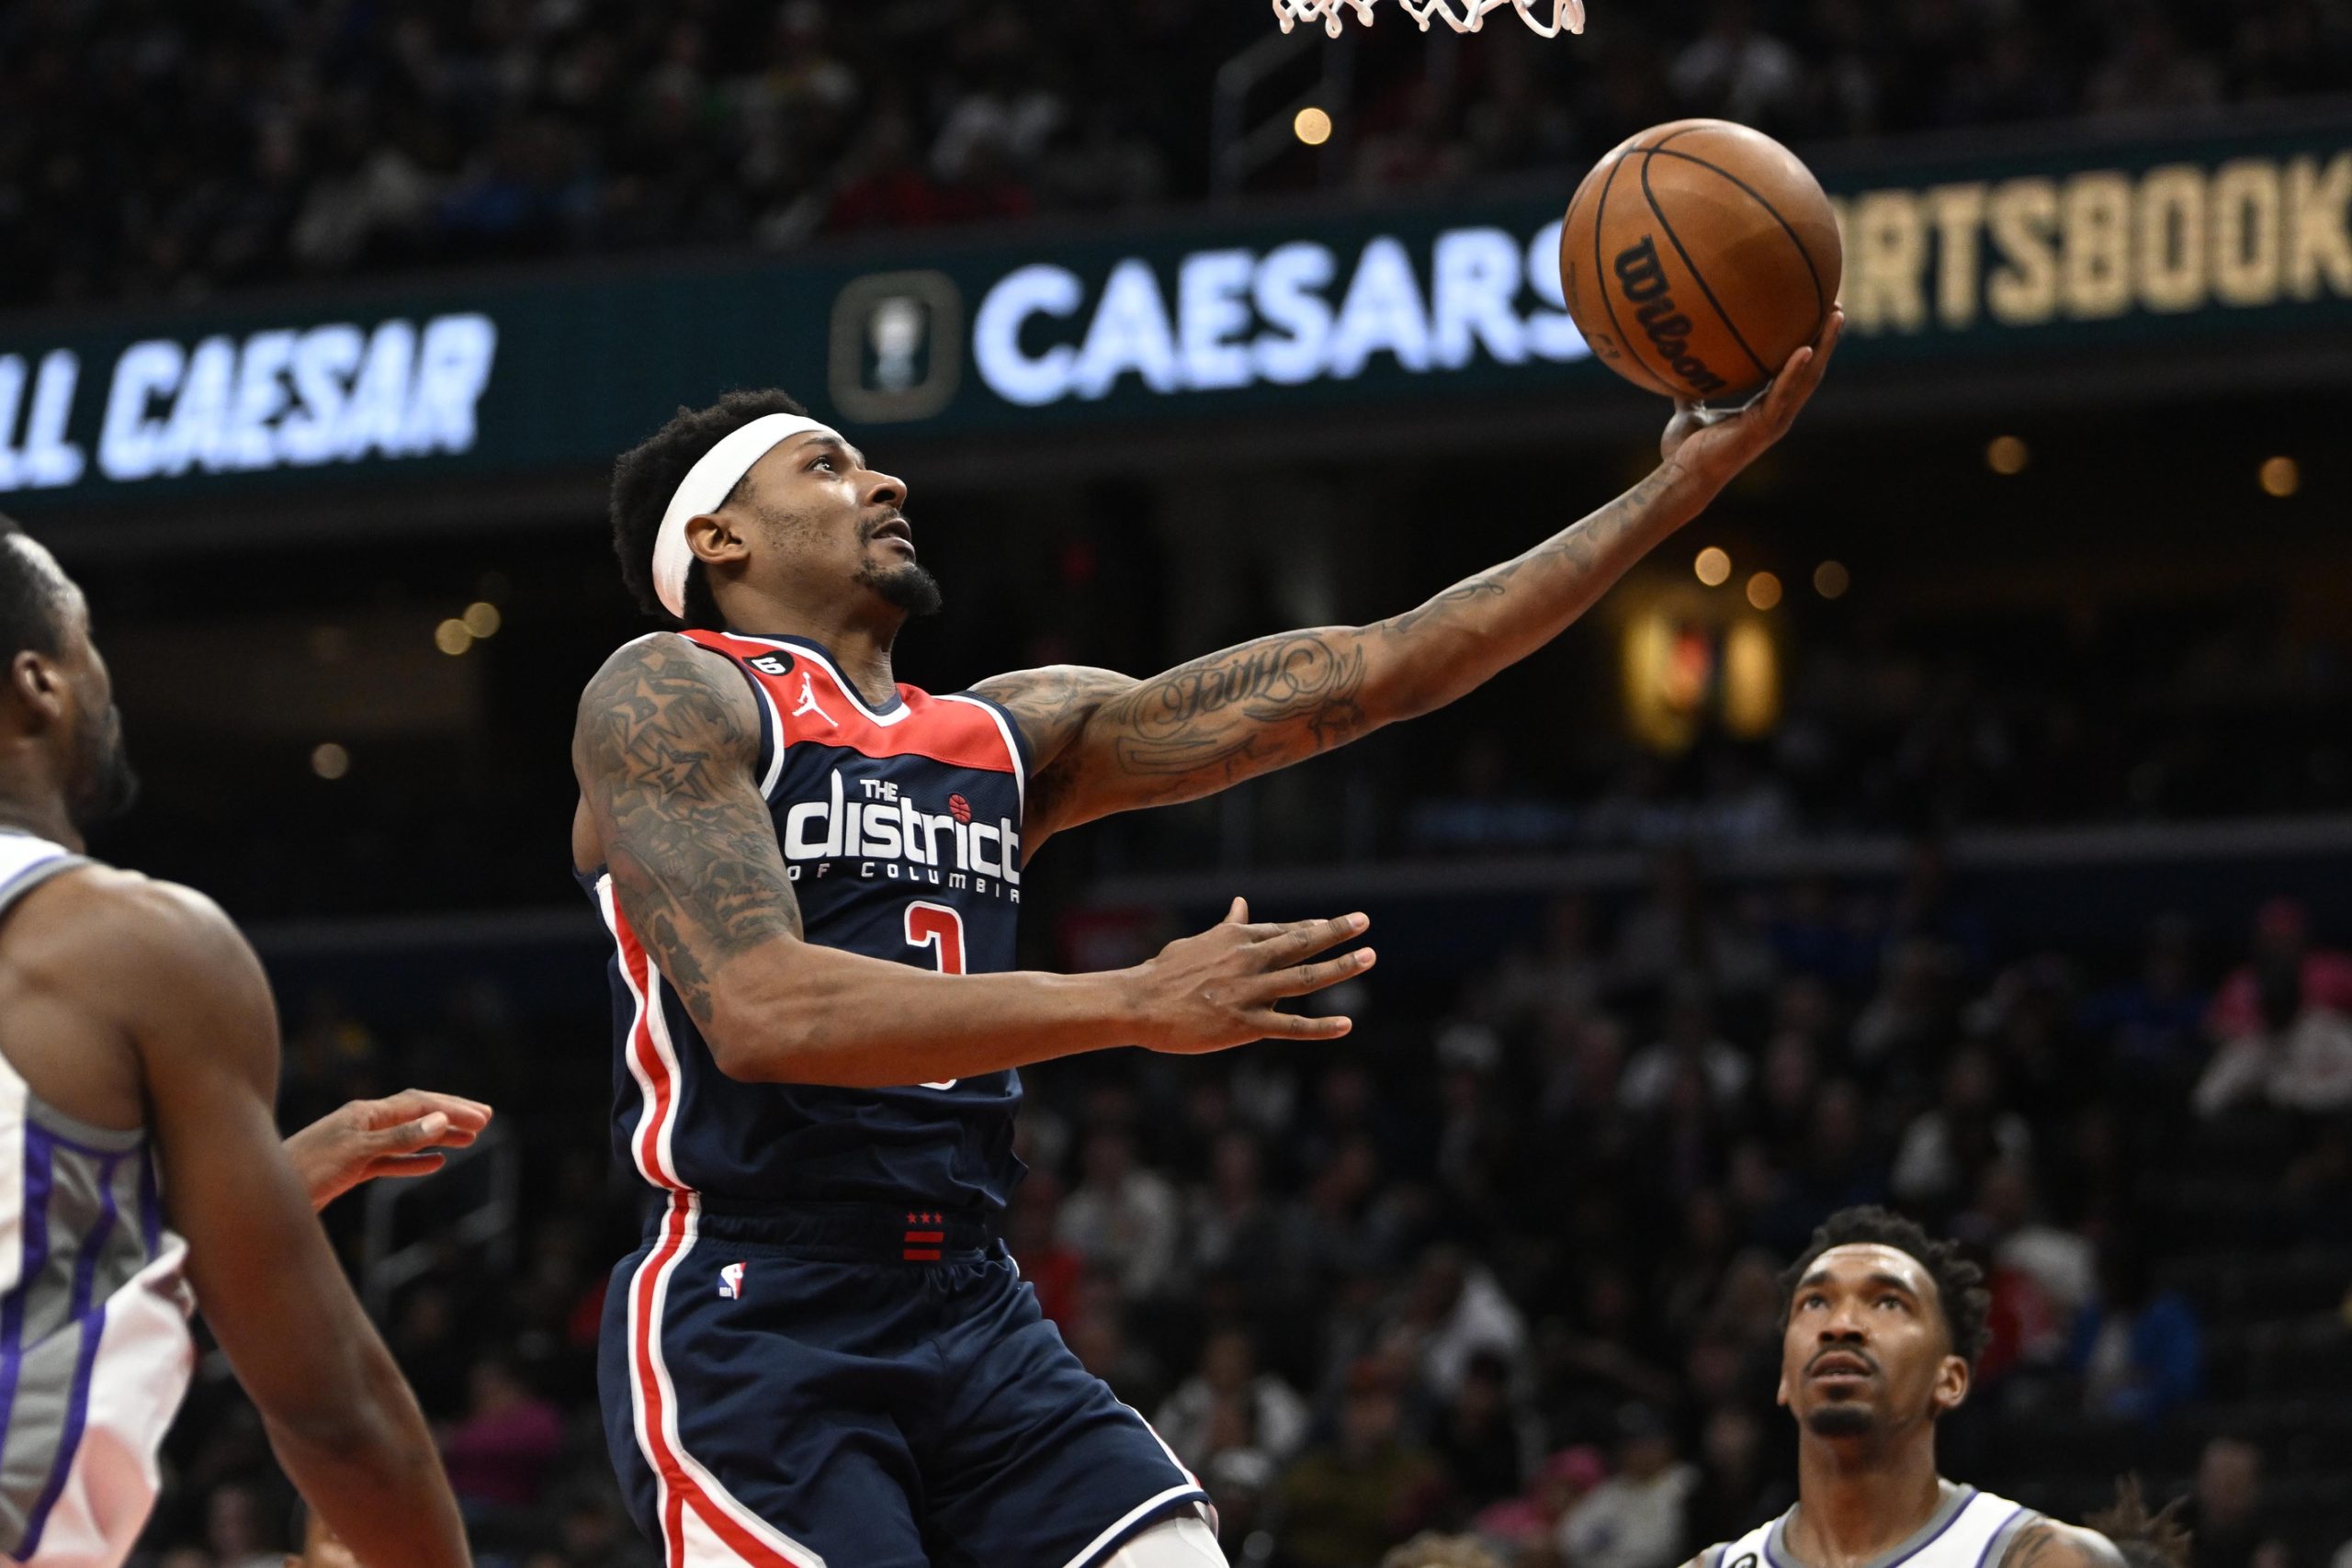 Mar 18, 2023; Washington, District of Columbia, USA; Washington Wizards guard Bradley Beal (3) scores against the Sacramento Kings during the second half at Capital One Arena. Beal to Suns. Mandatory Credit: Brad Mills-USA TODAY Sports